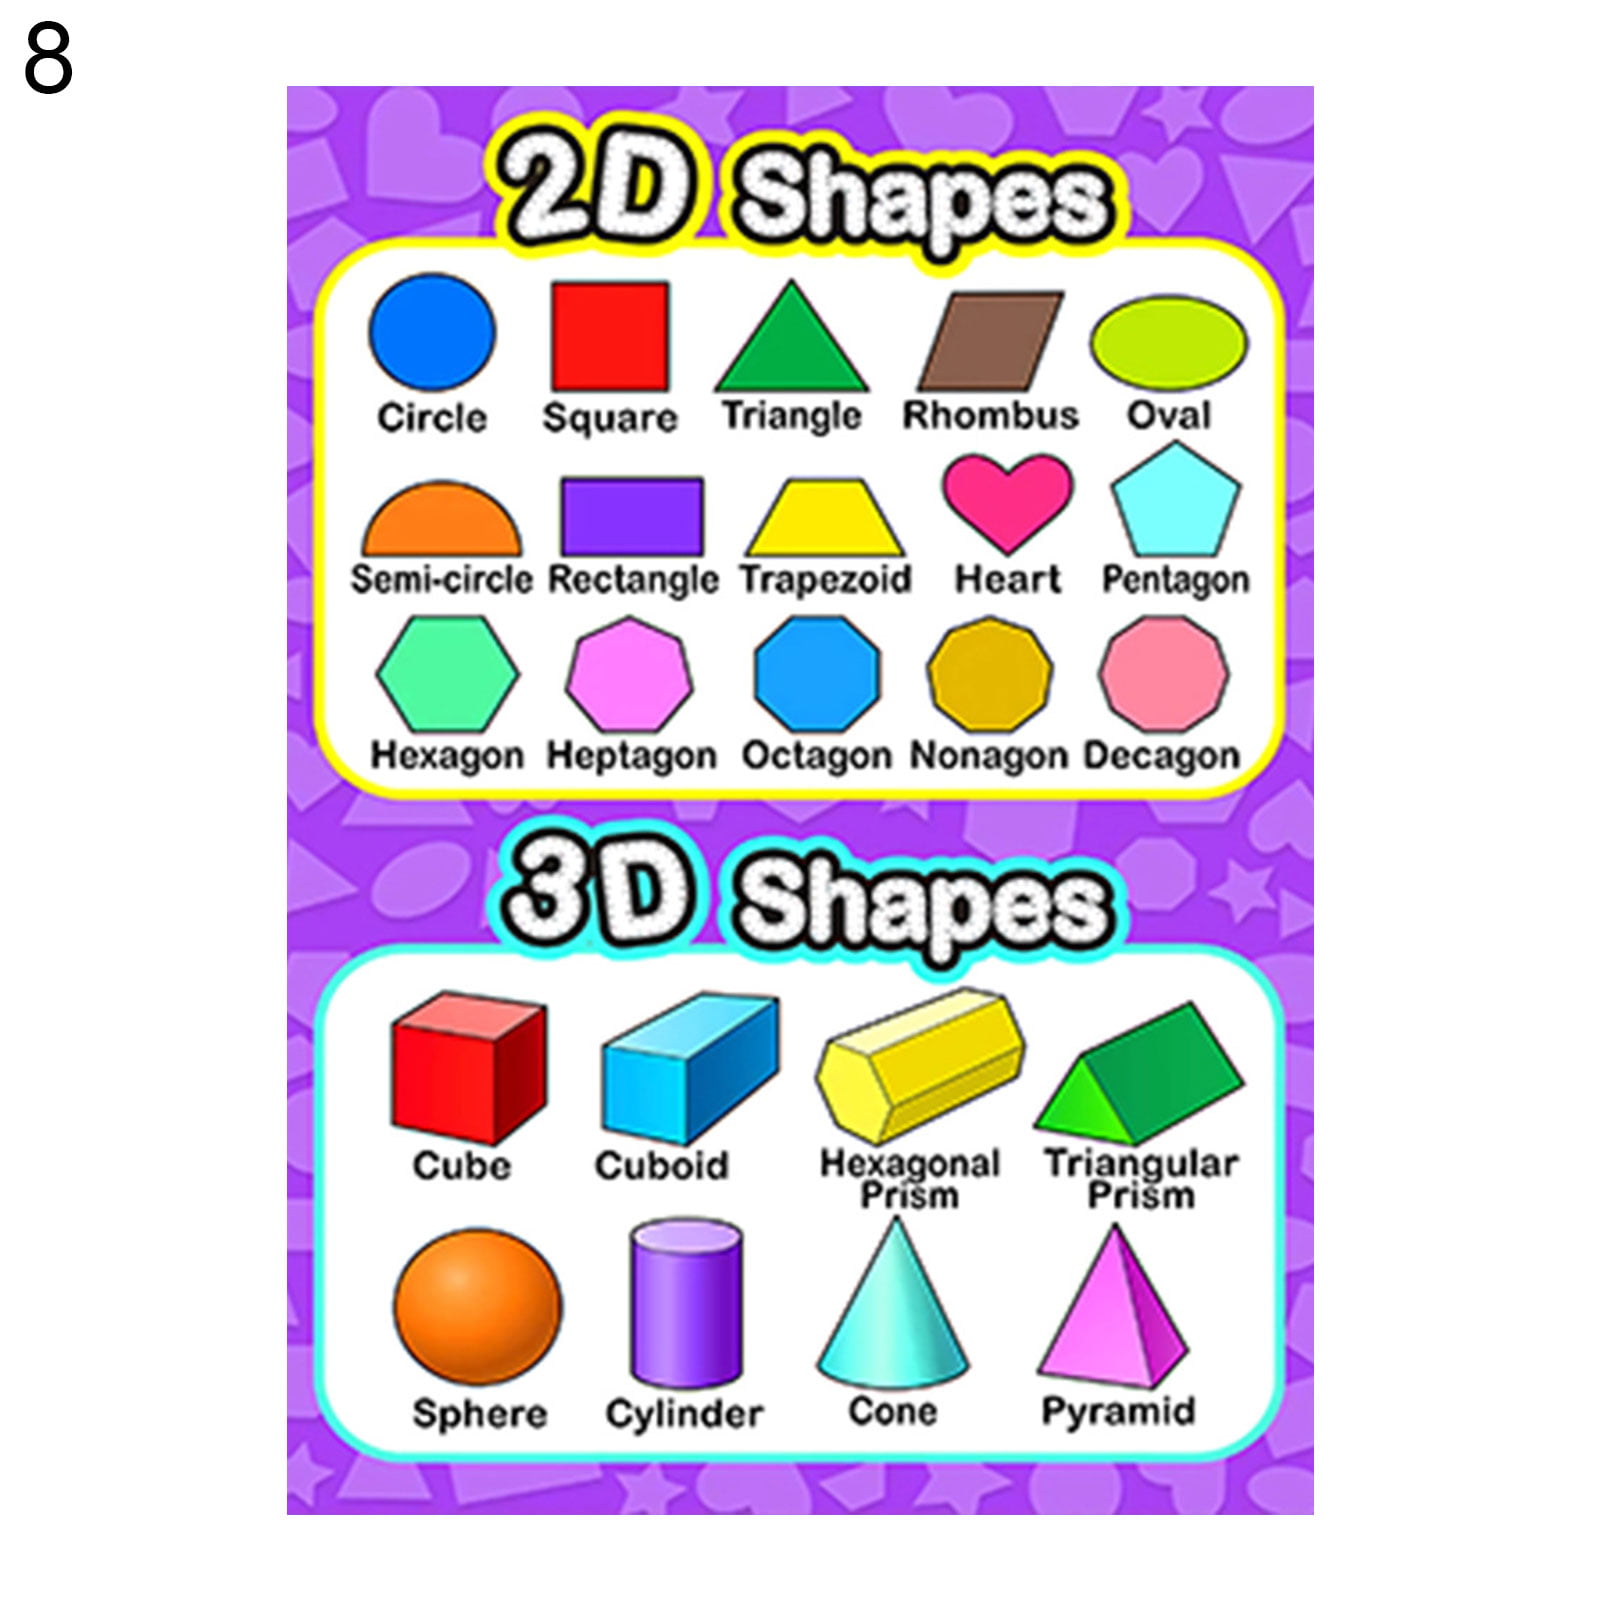 Perfect A3-42cm x 30cm 20 Educational Preschool Posters for Toddlers 